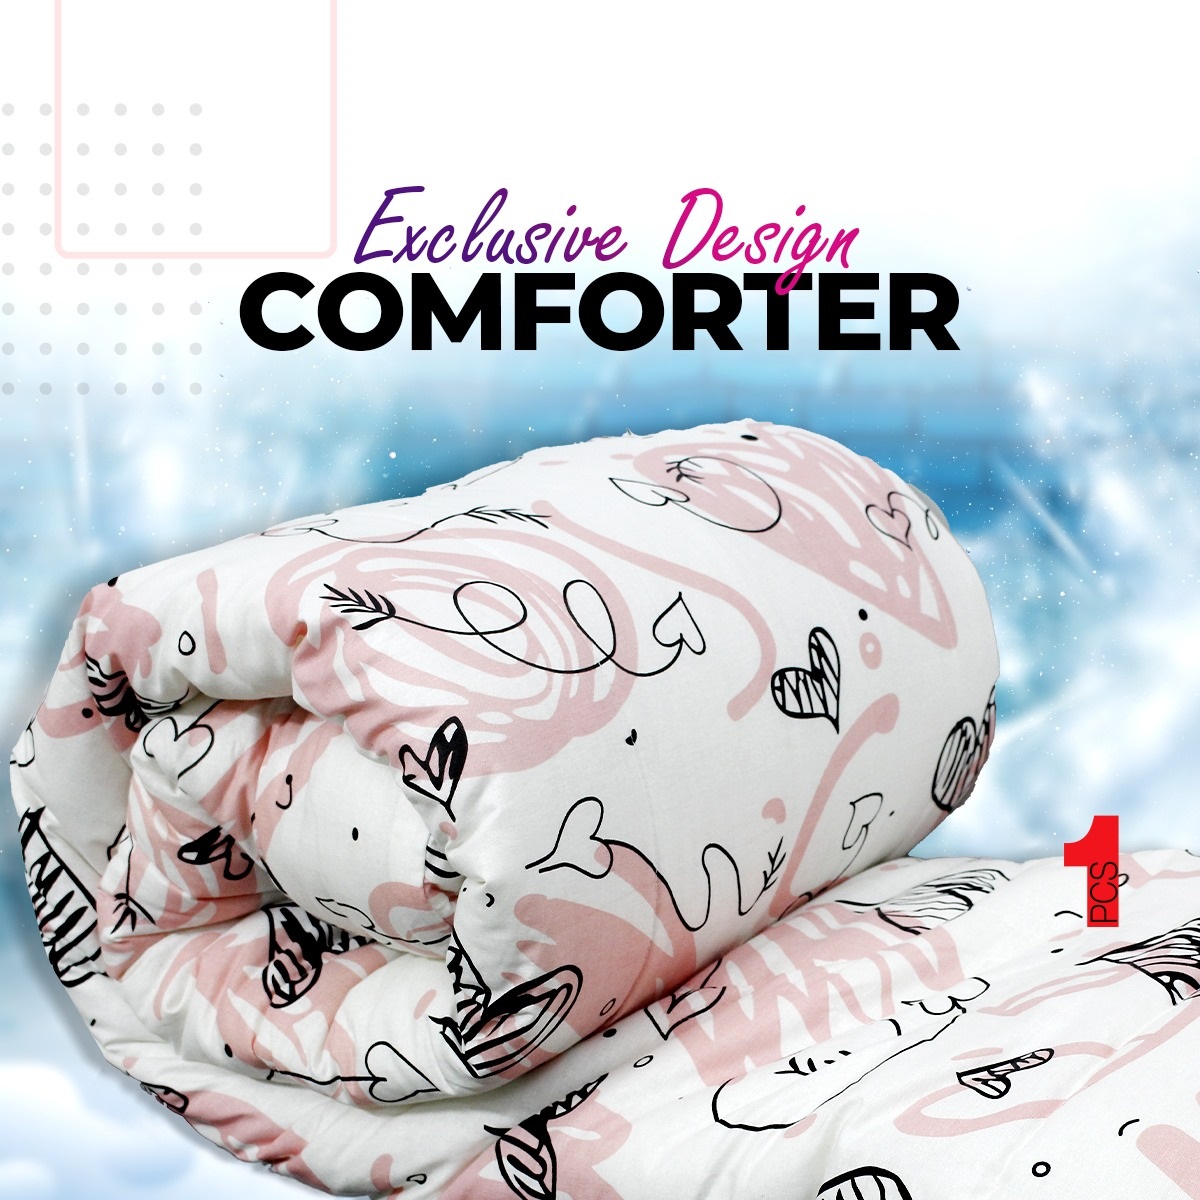 King Size Comforter Cotton Outside Fiber Filler Inside Too Warmth Perfect For Winter - LC003